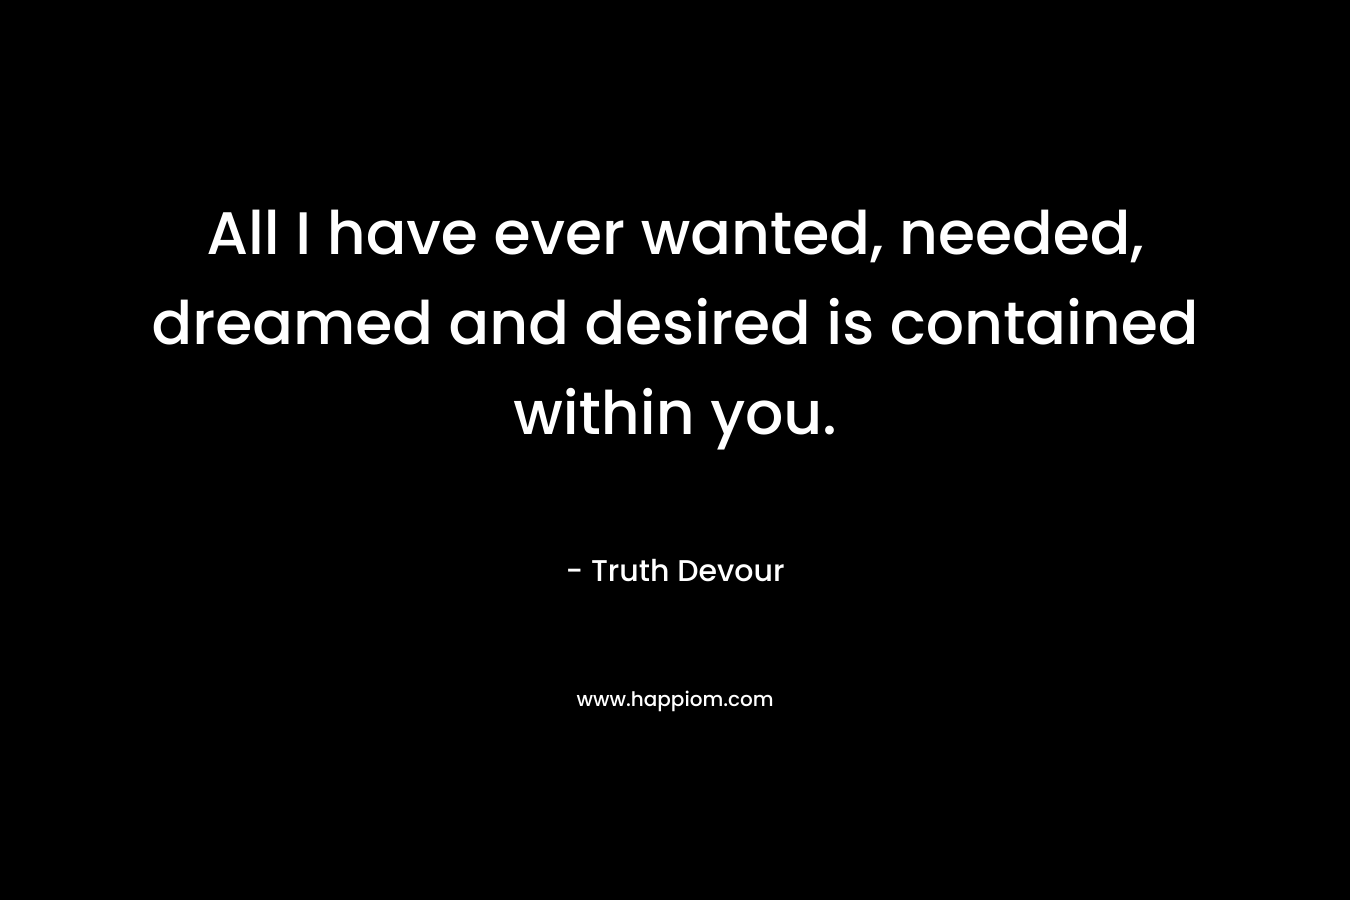 All I have ever wanted, needed, dreamed and desired is contained within you. – Truth Devour